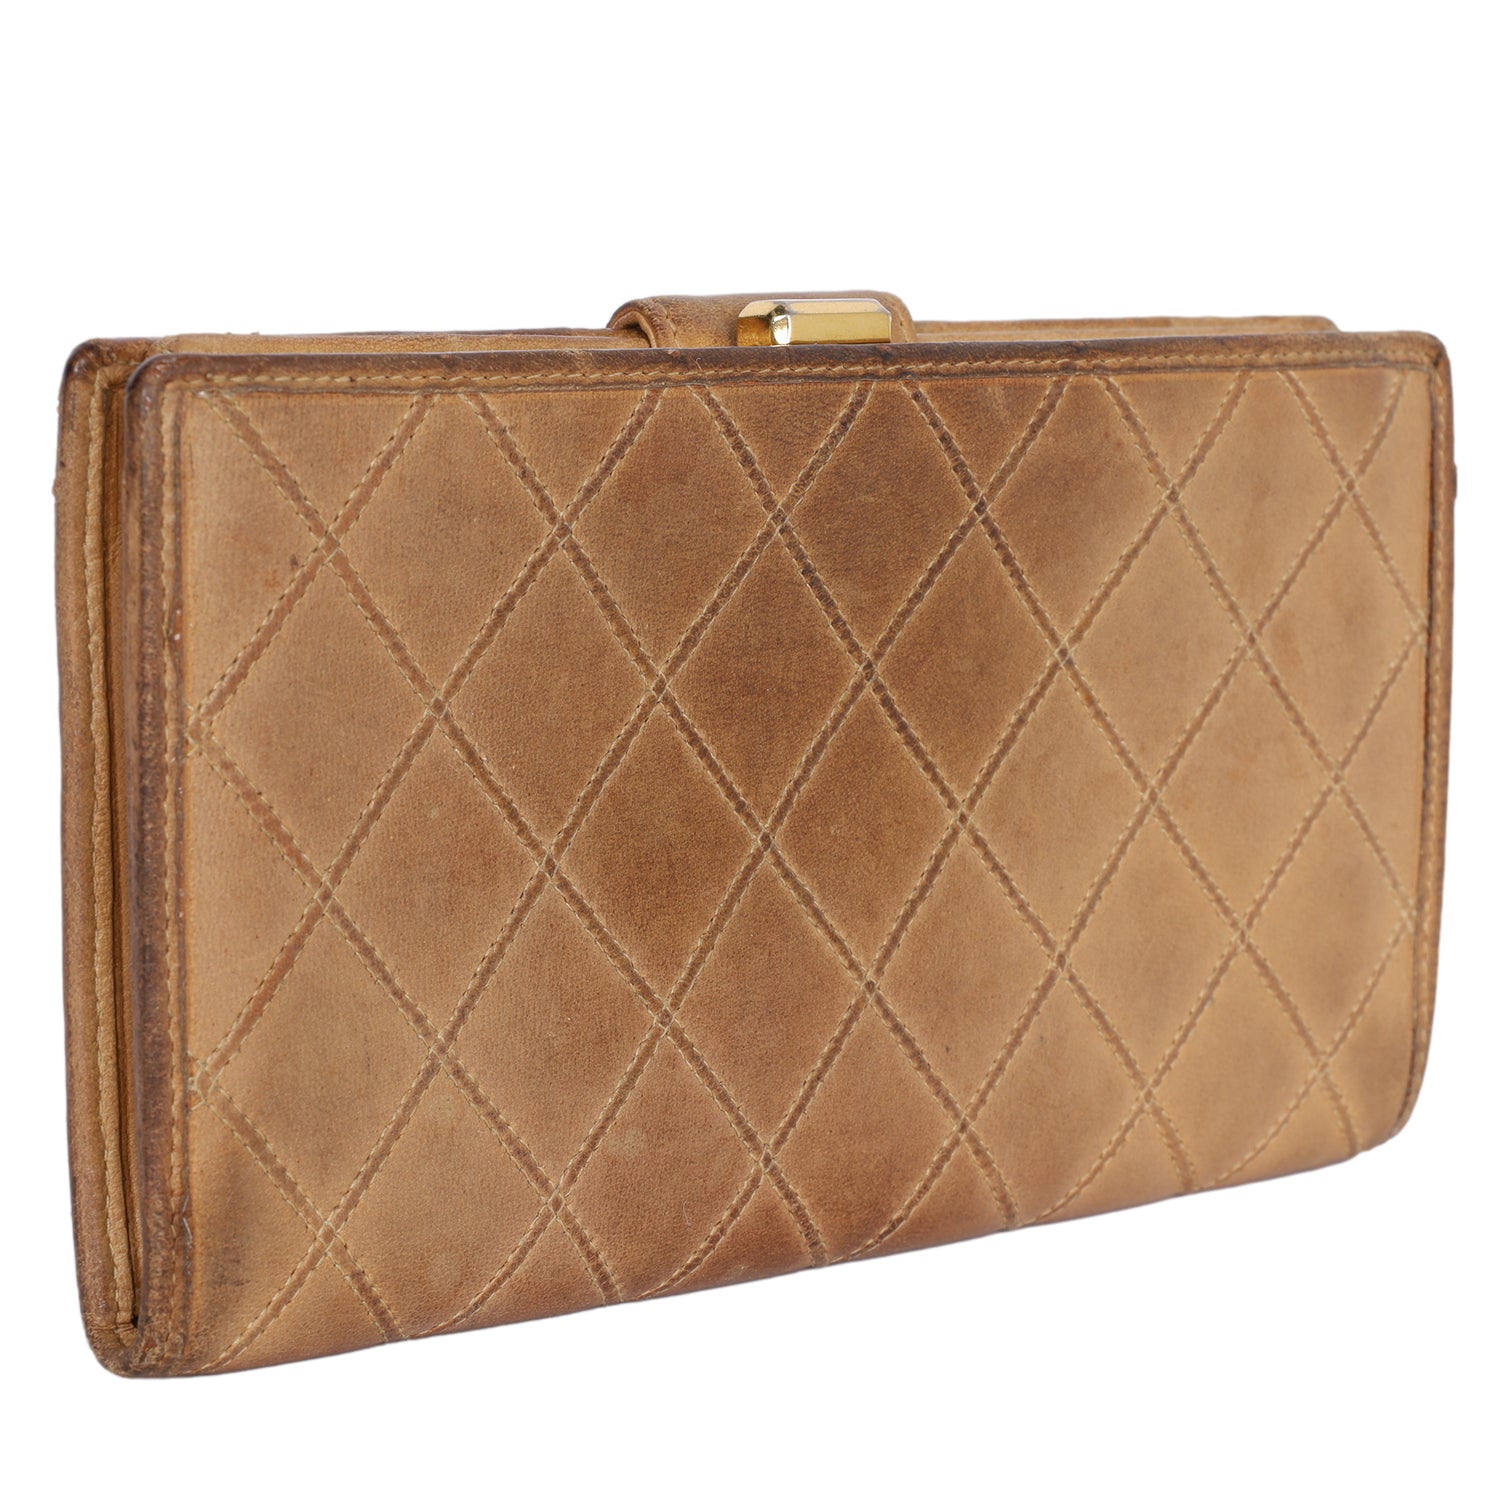 Chanel Pre-owned Diamond Quilted Clutch Bag